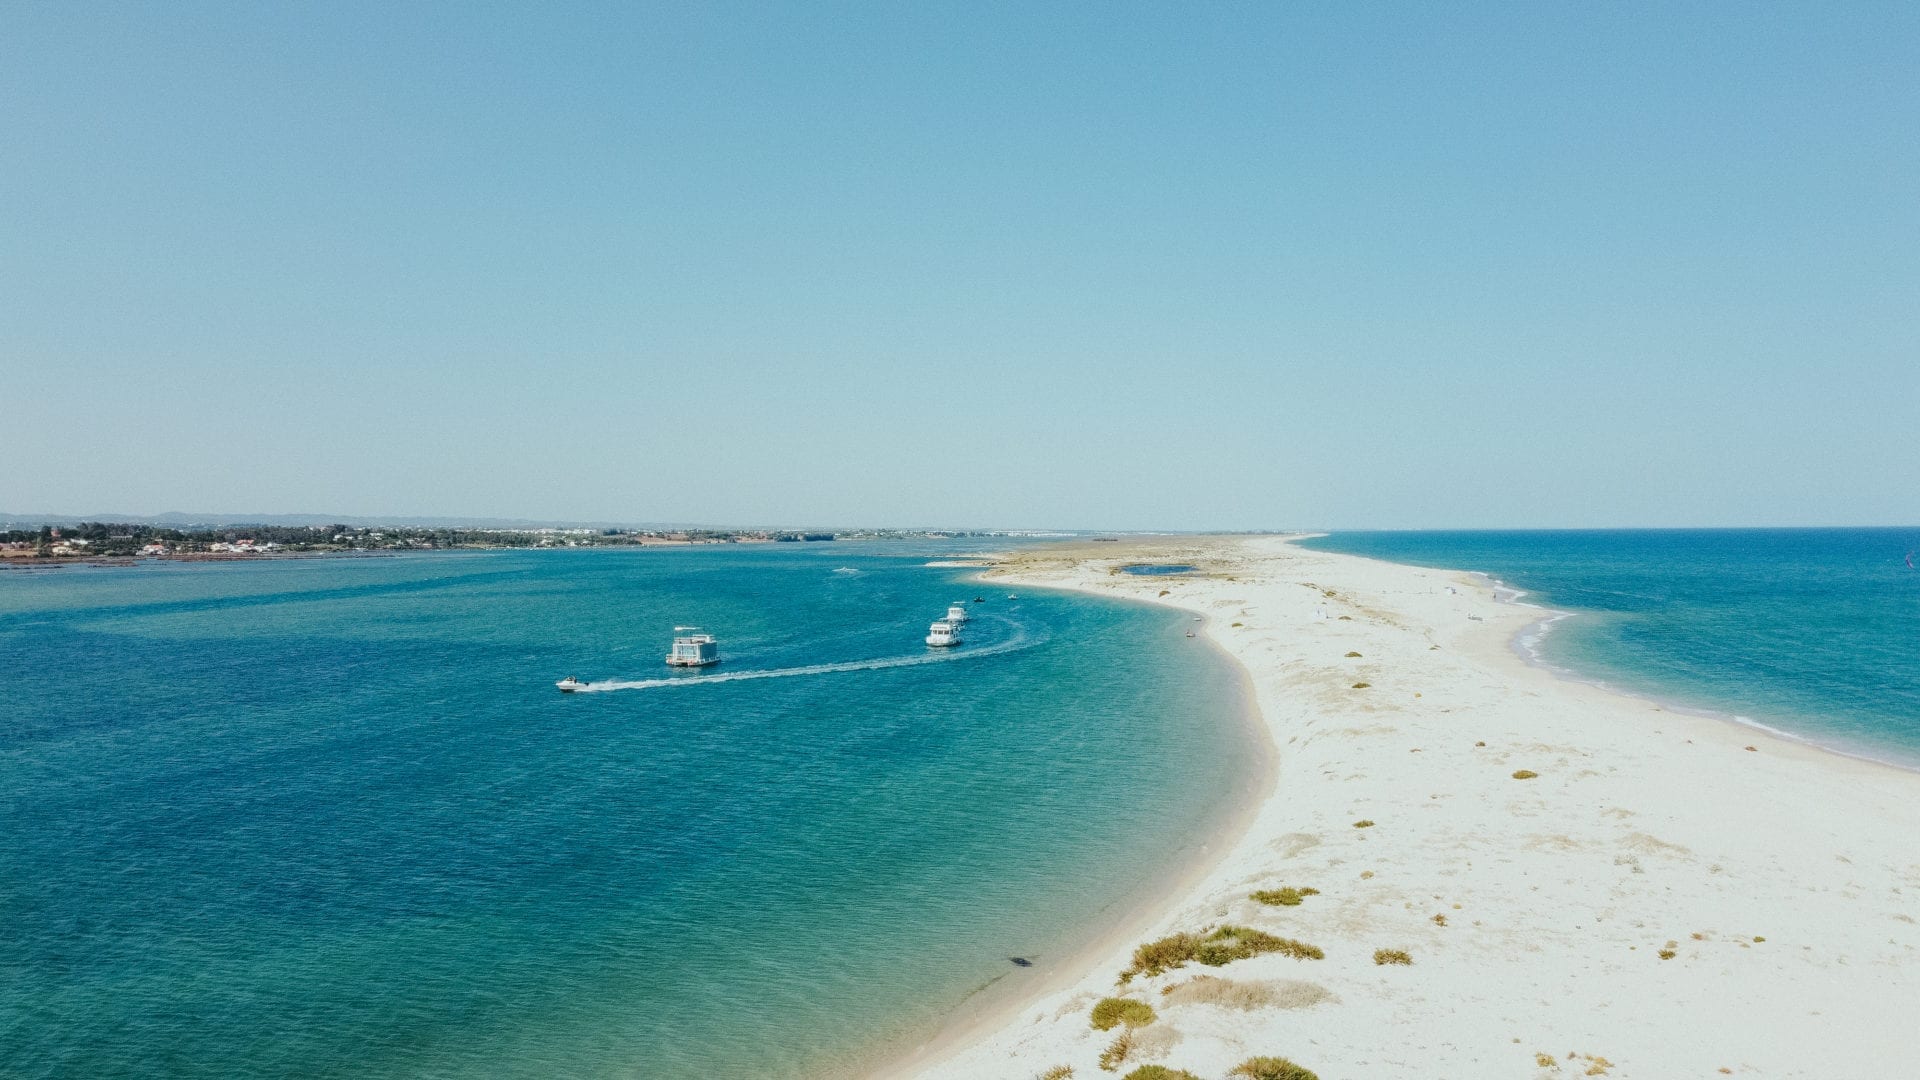 Islands of Ria Formosa reached from Fuseta